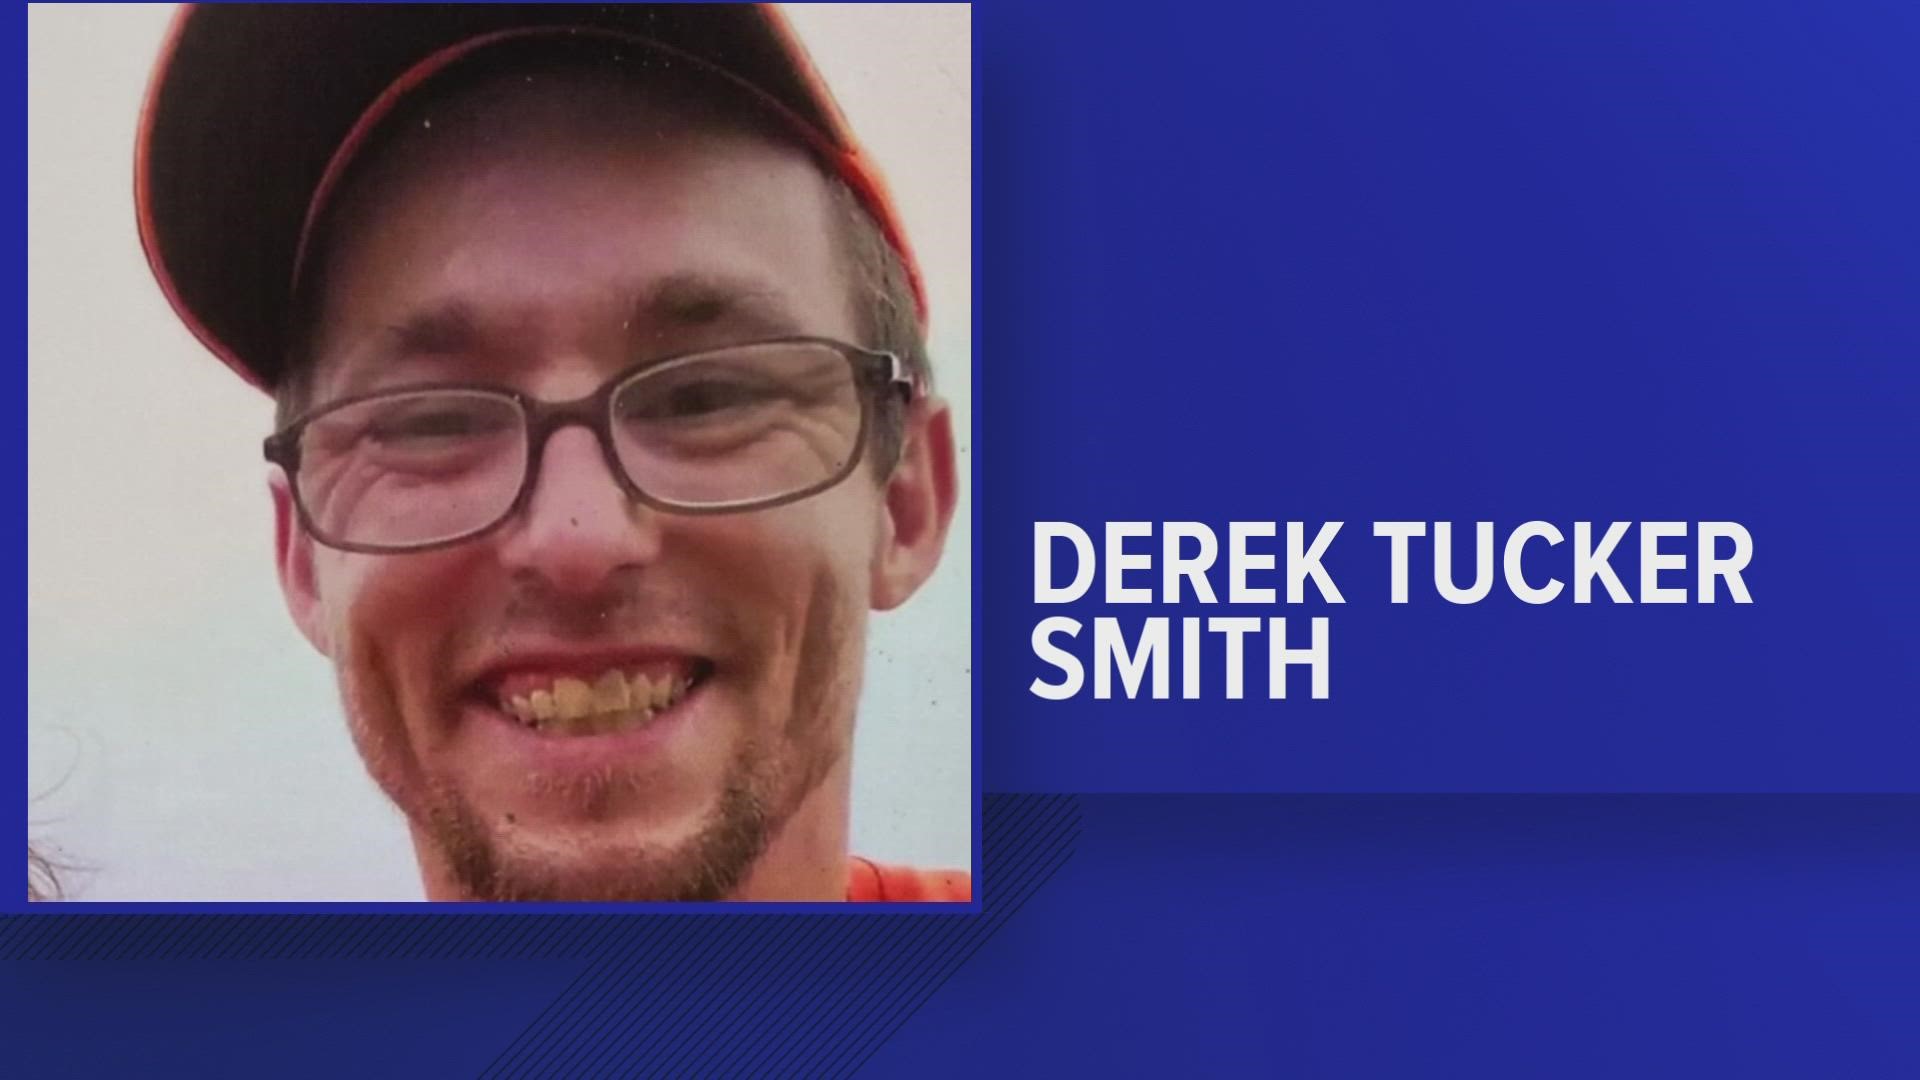 Deputies said Derek Smith was last seen in his vehicle in Powell back in August, saying he had visited Kentucky before he disappeared.